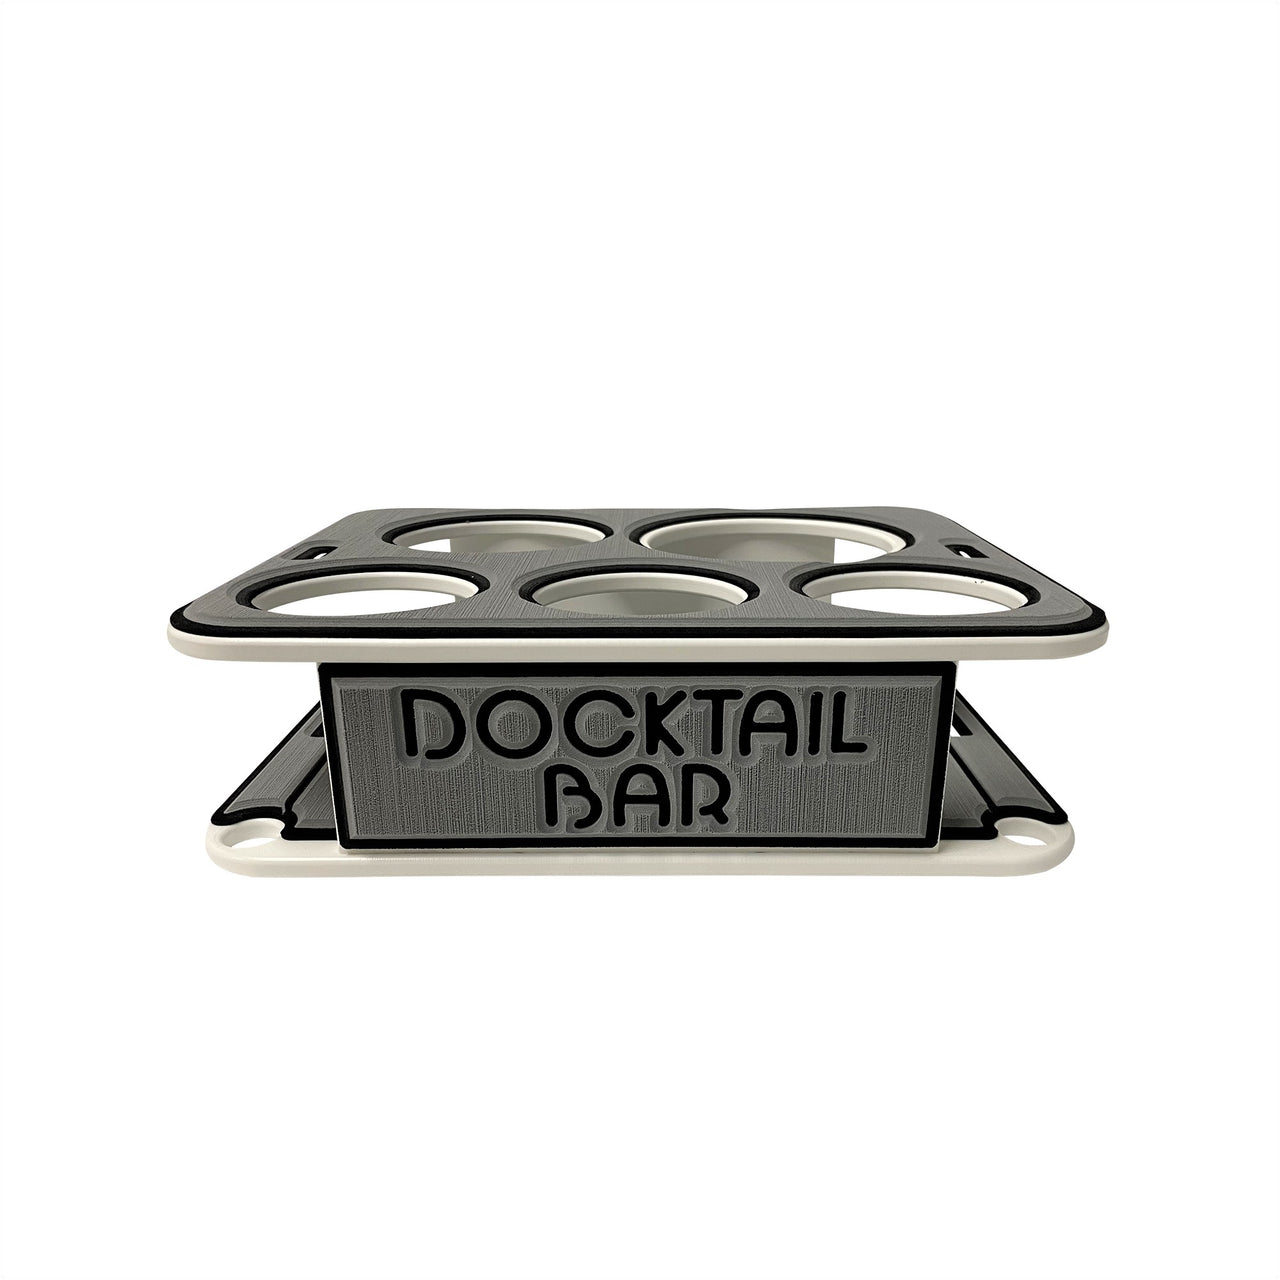 Docktail® Bar's Boat Accessory Line - Tables, Bars & Boating Goodies!